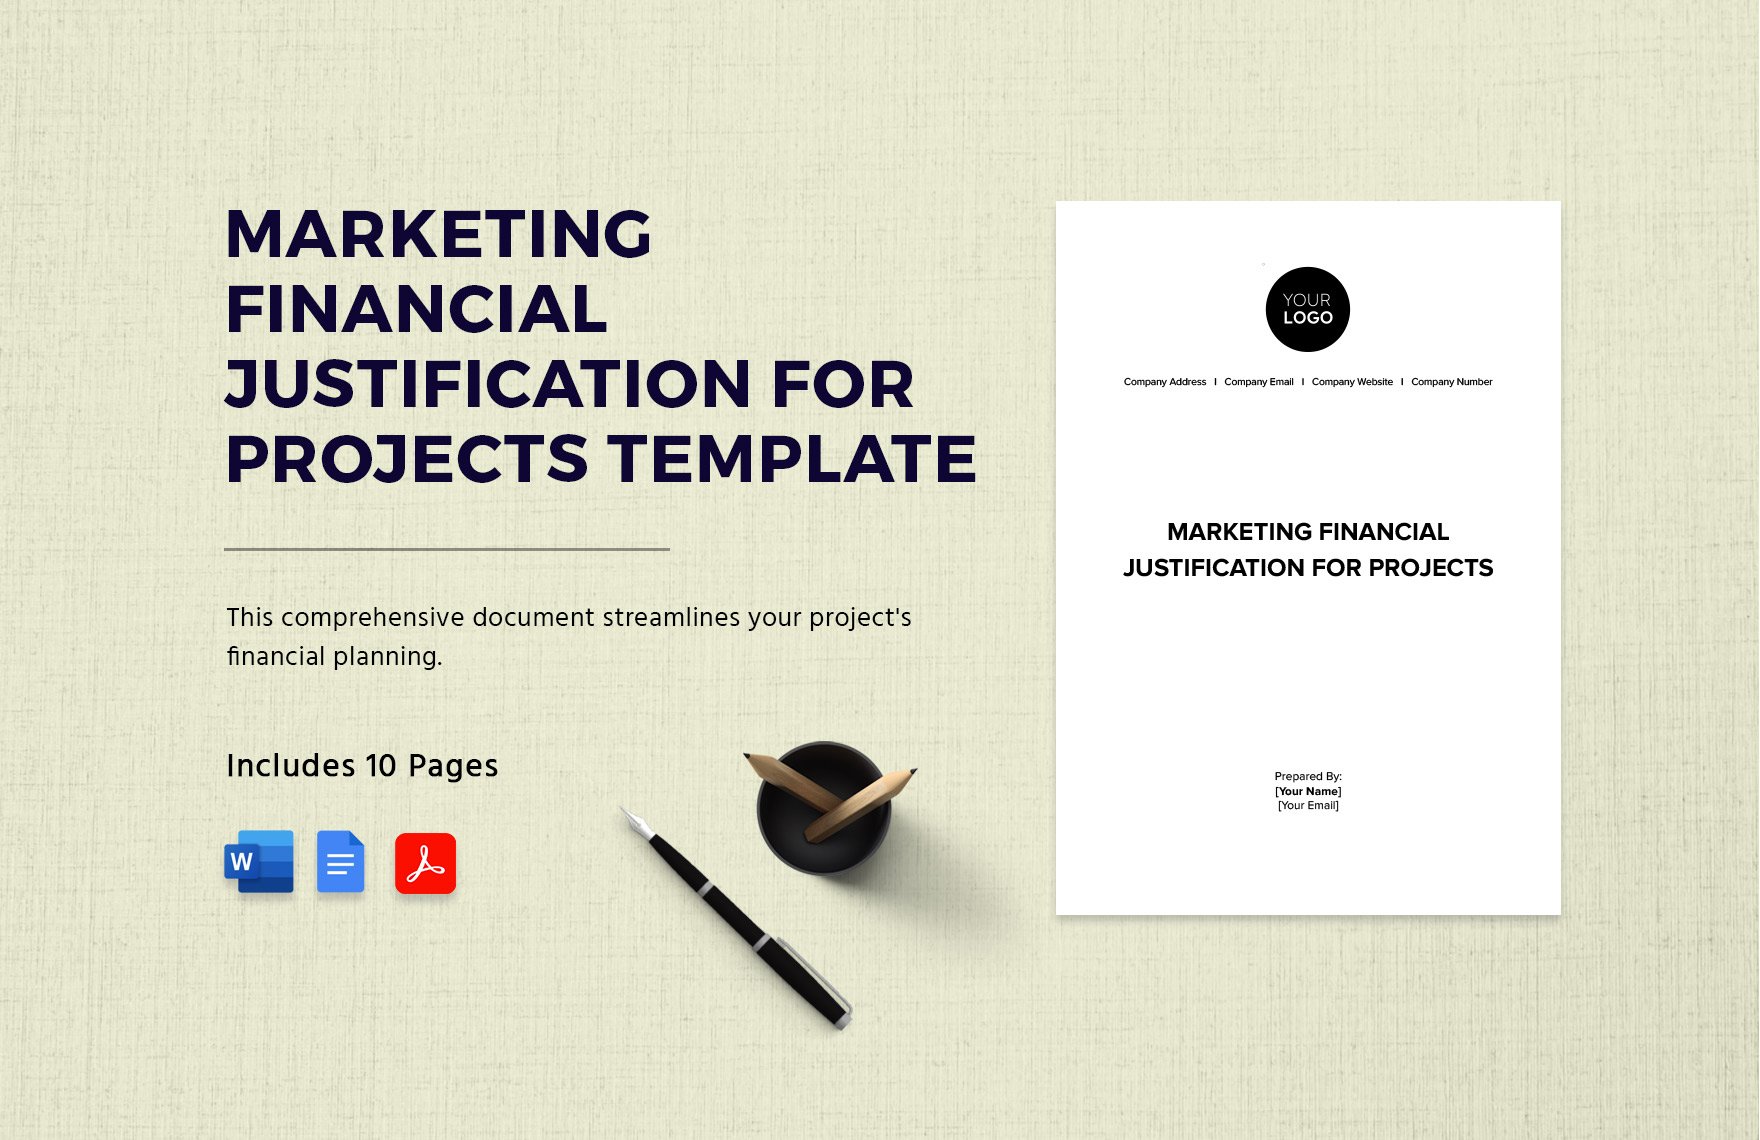 Marketing Financial Justification for Projects Template